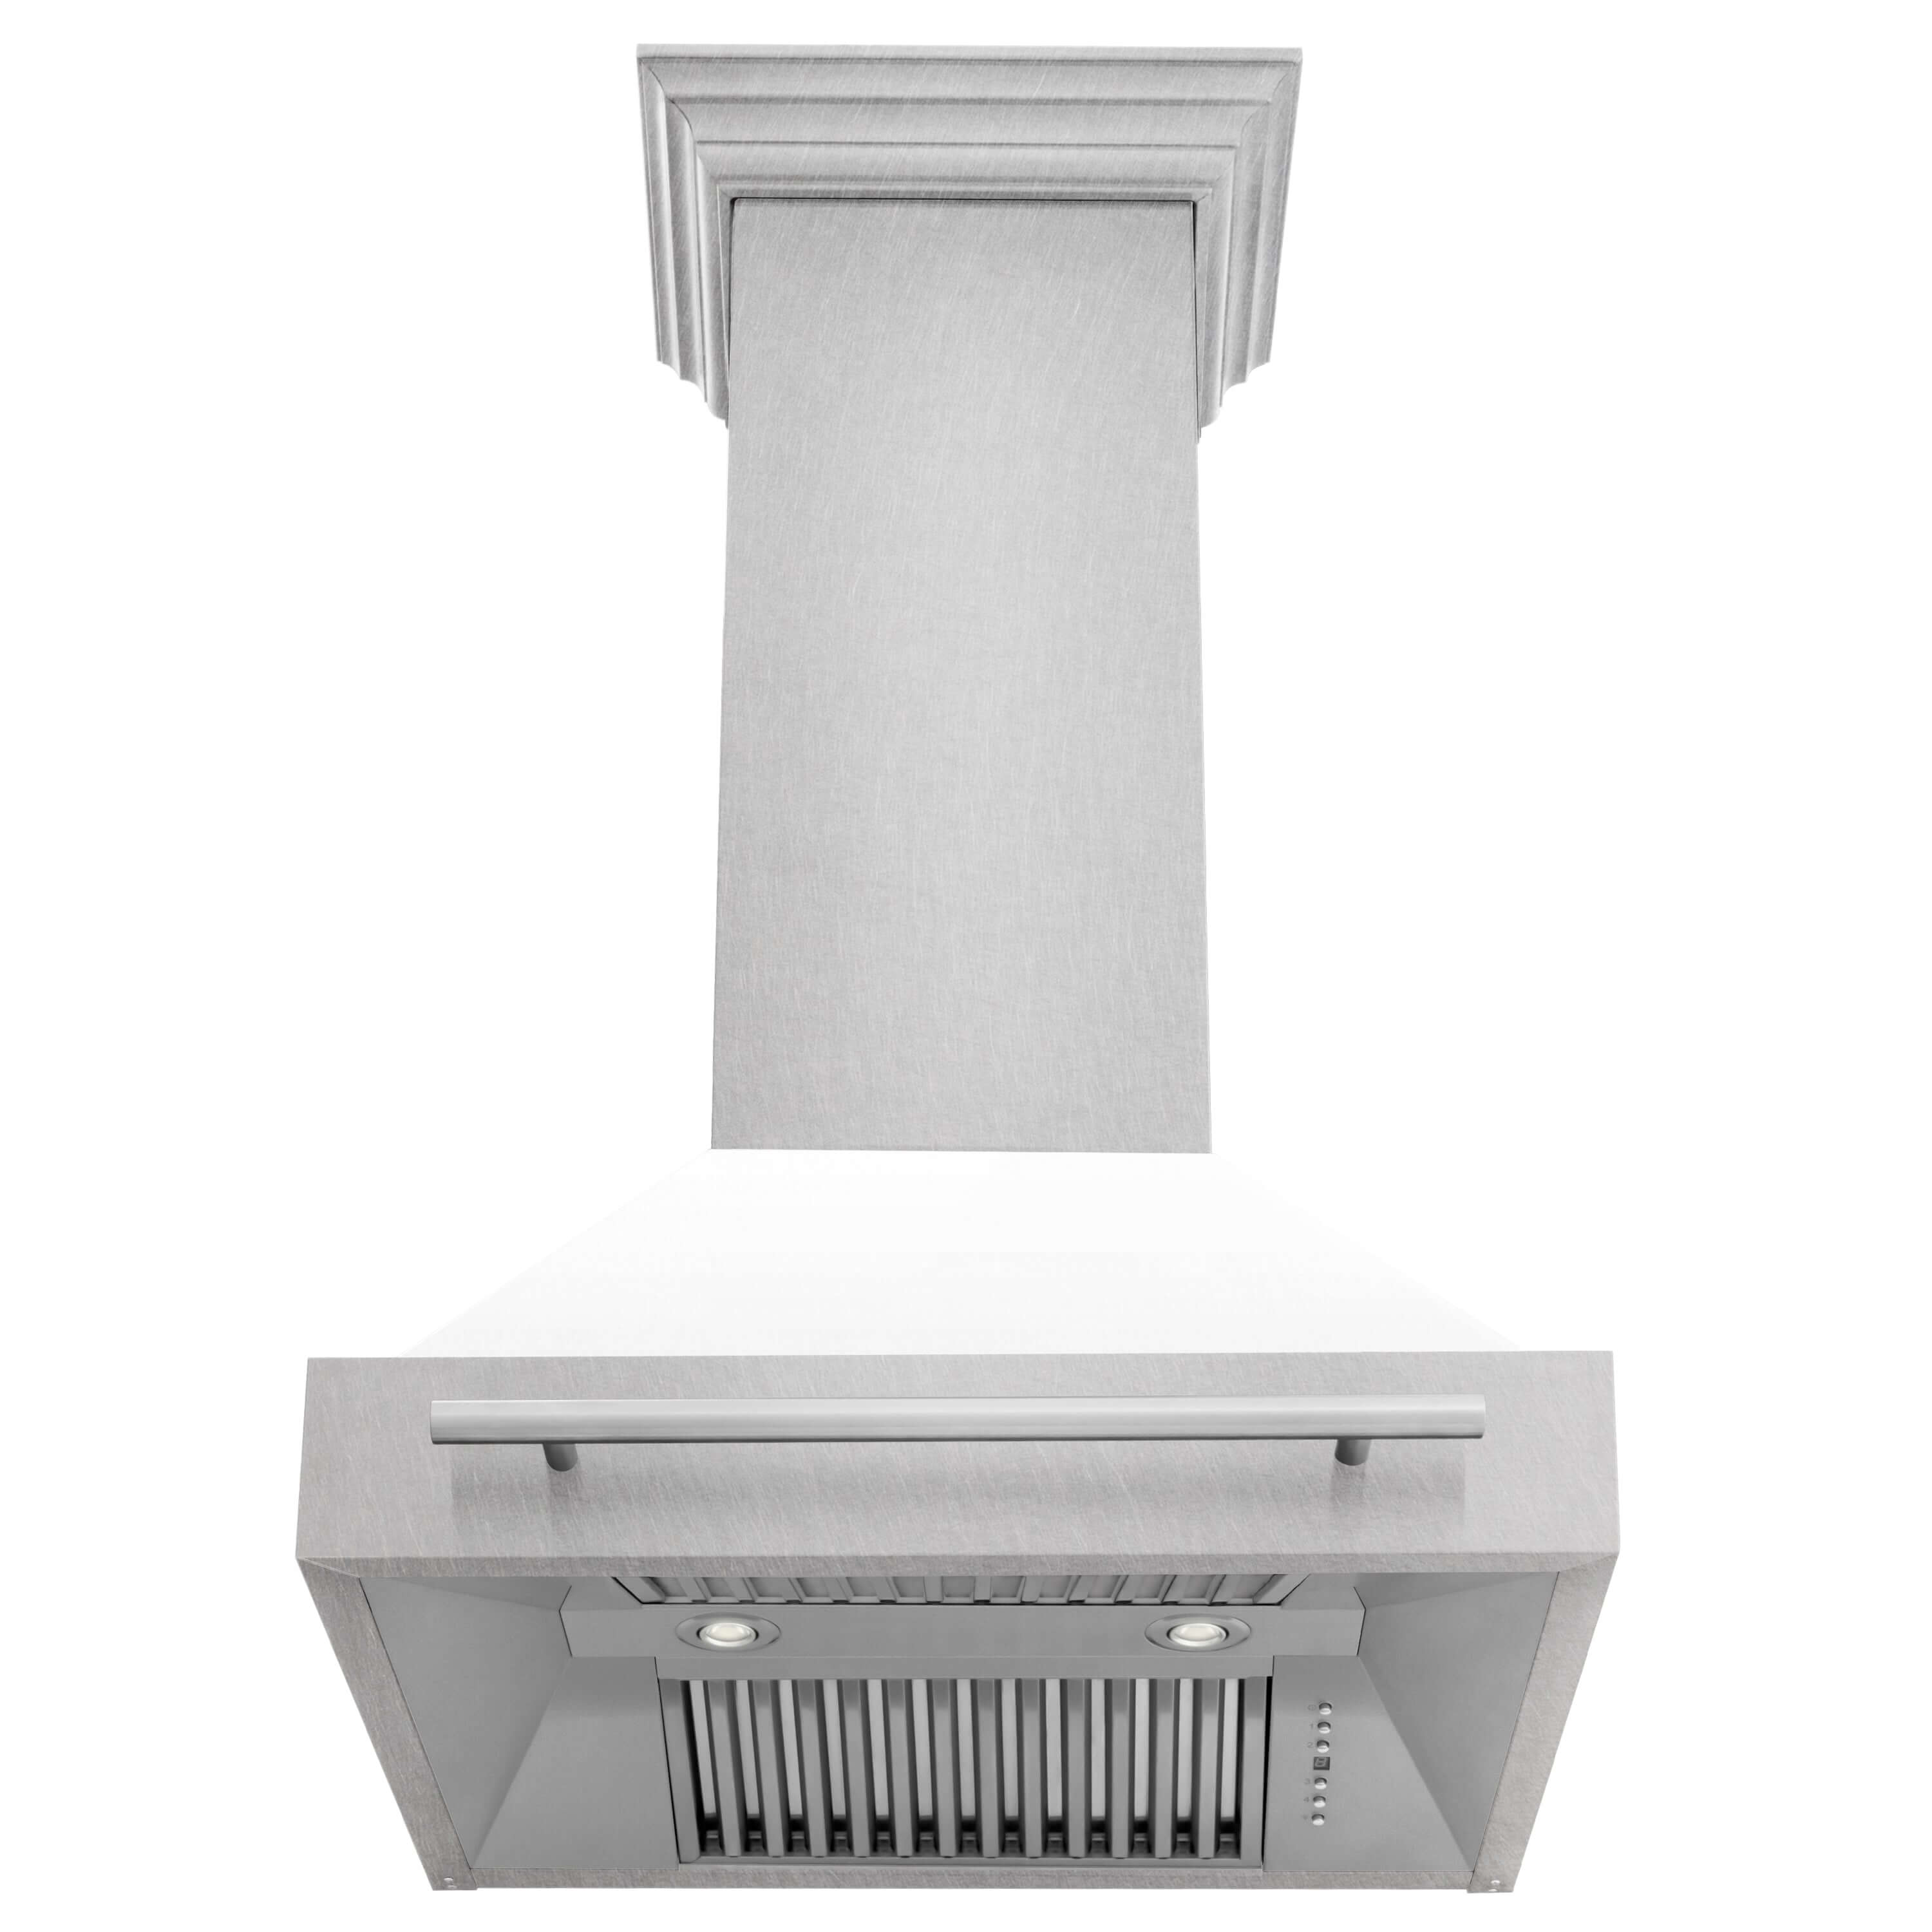 ZLINE 30 in. Fingerprint Resistant Stainless Steel Range Hood with Color Shell Options (8654SNX-30)